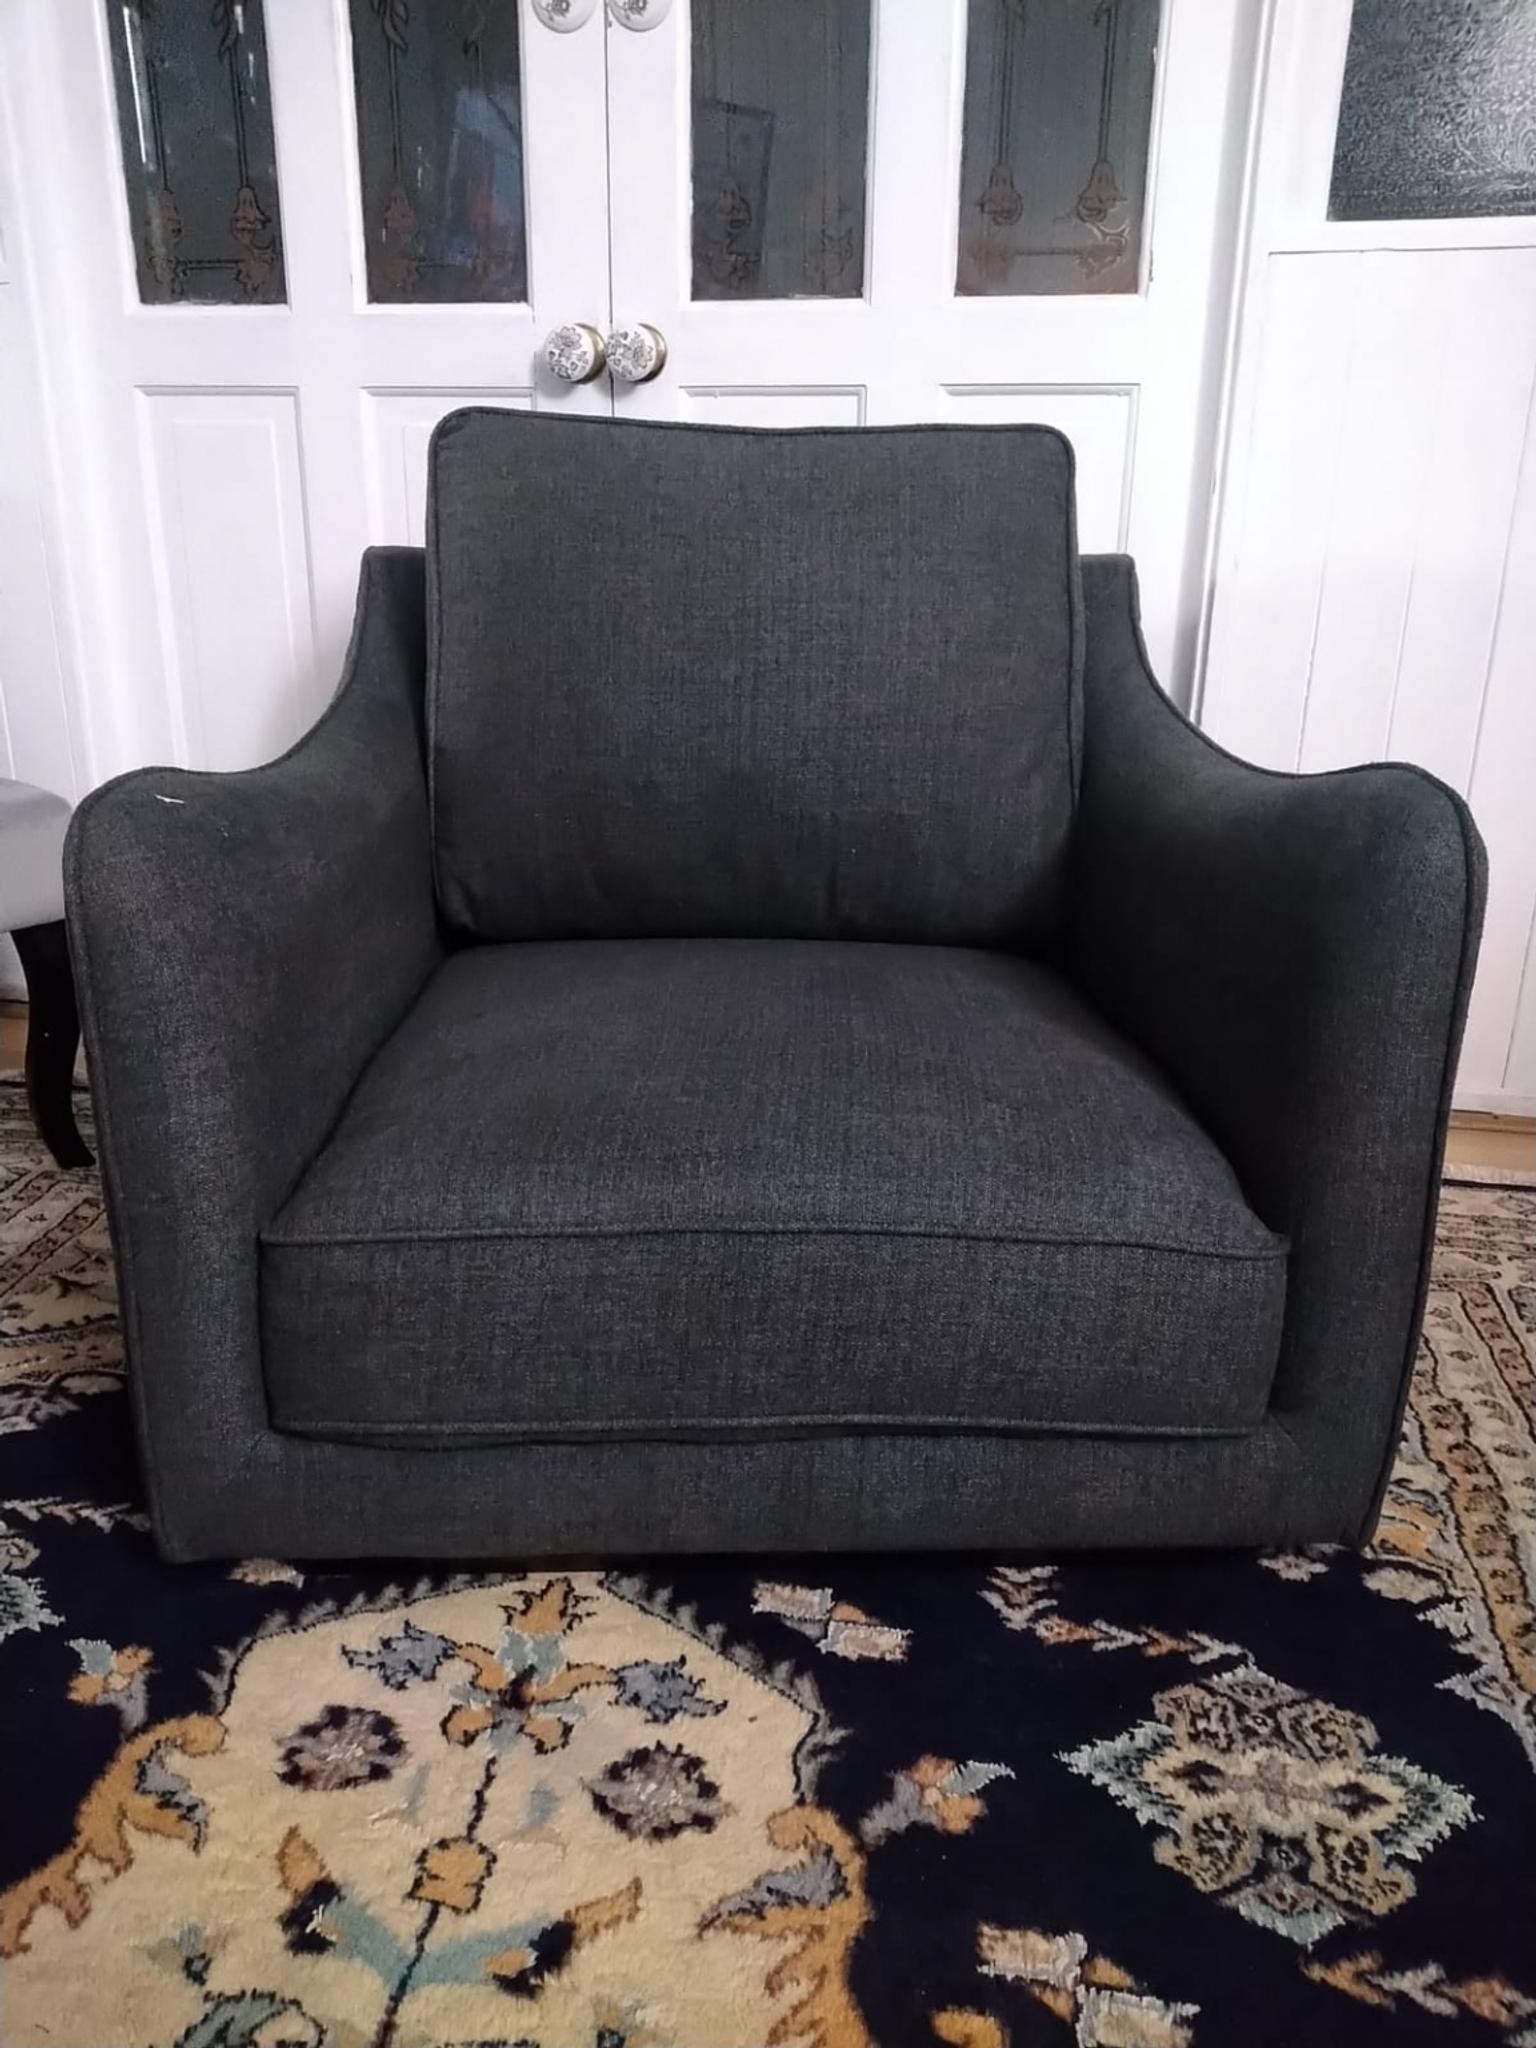 Armchair Covers Dunelm Household Furniture